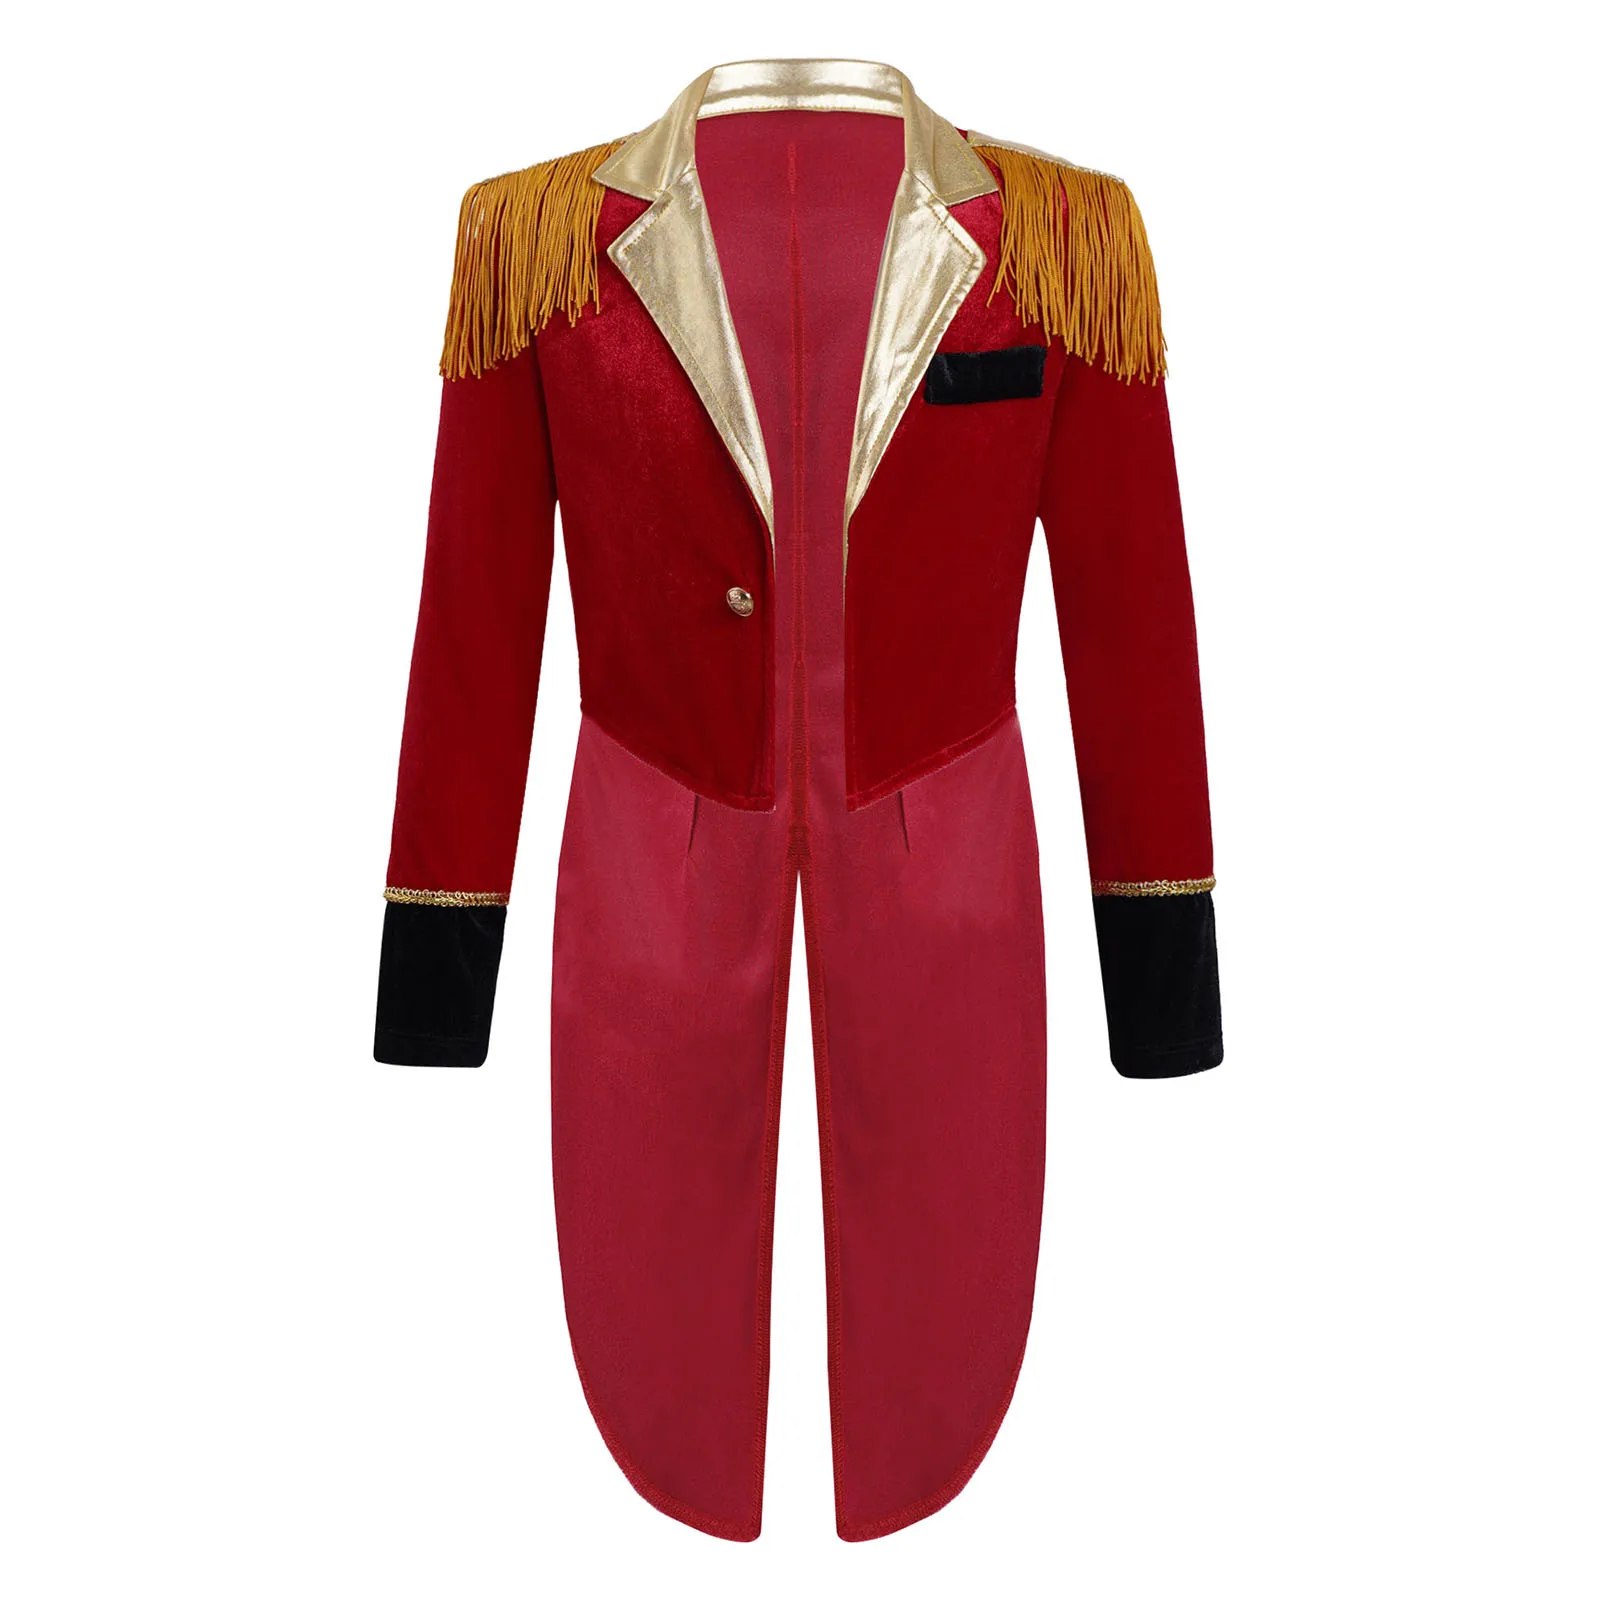 

Red Kids Boys Circus Ringmaster Costume Long Sleeves Tassels Adorned Dip Hem Tailcoat Jacket Christmas Carnival Cosplay Outfit